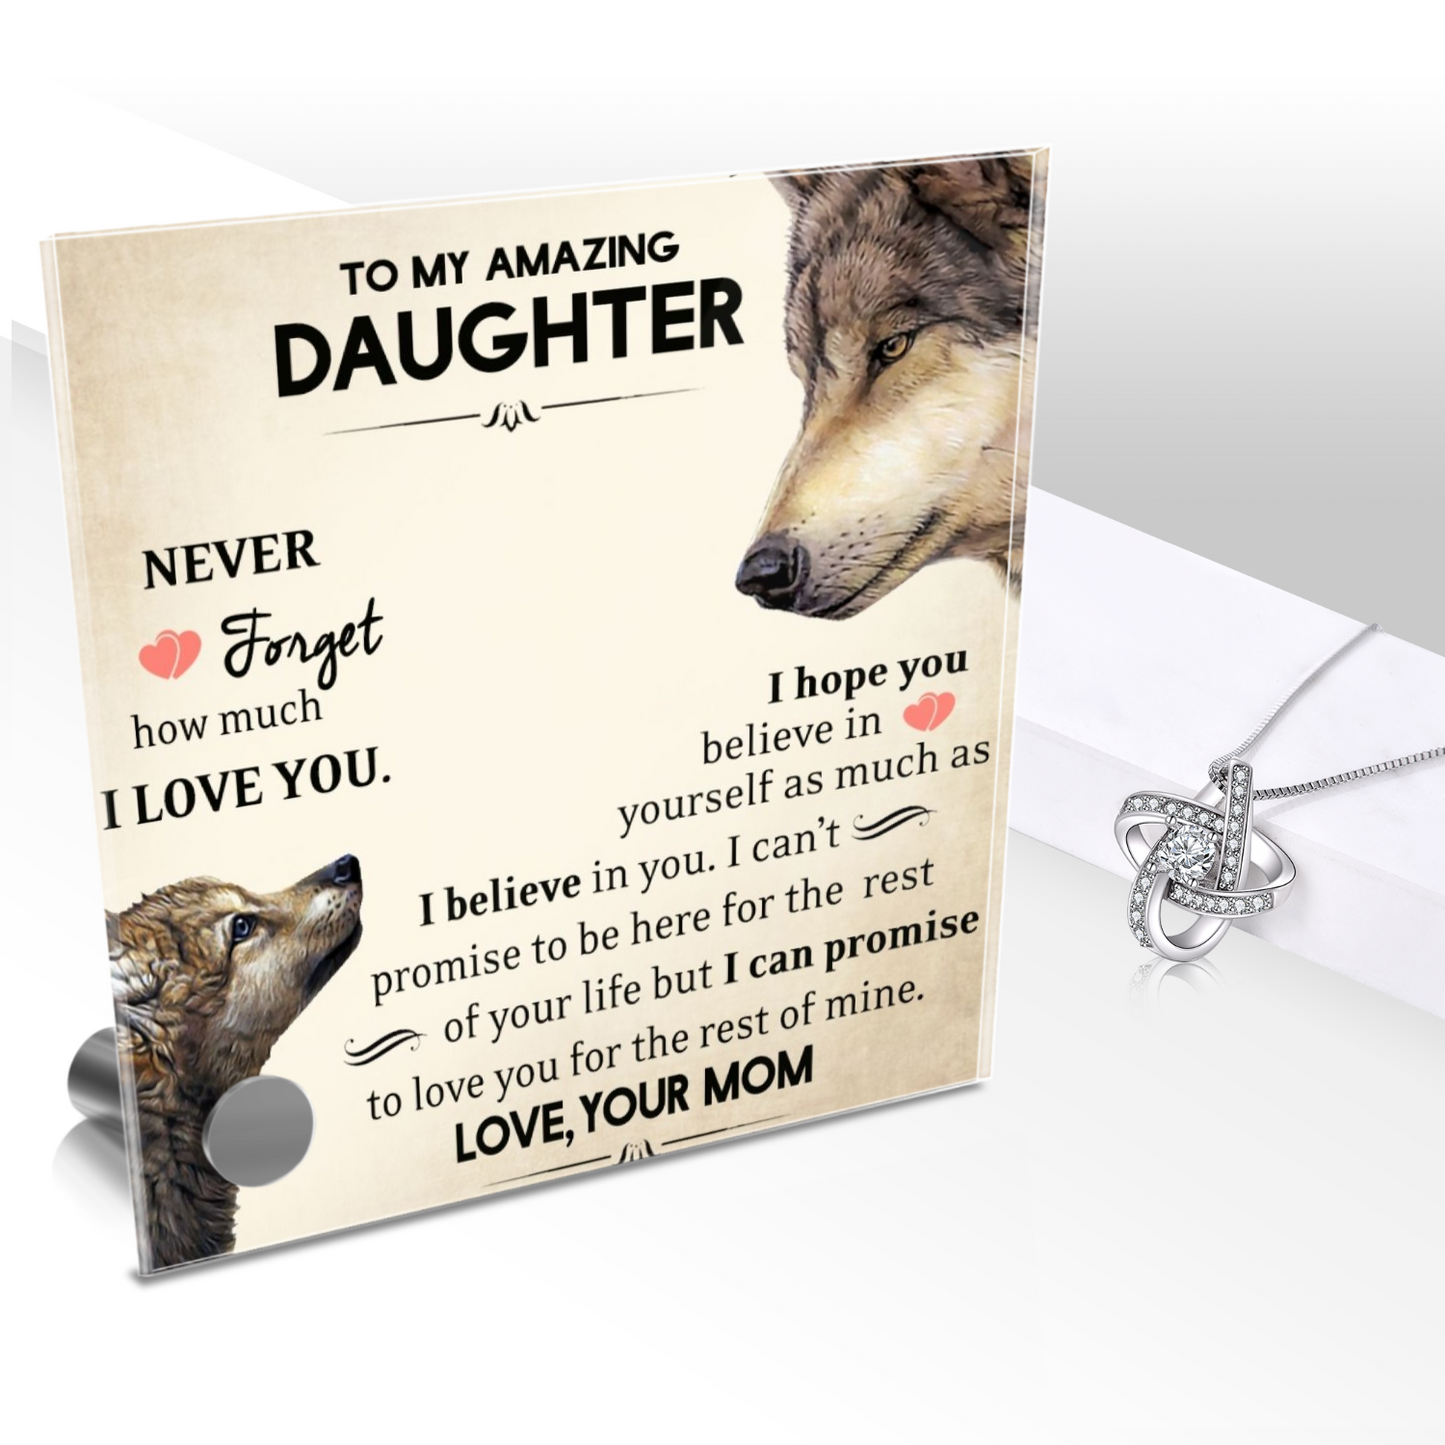 To My Daughter - Glass Message Display With Necklace Gift From Mom Graduation, Christmas Gifts to Daughter, Daughter Birthday Jewelry